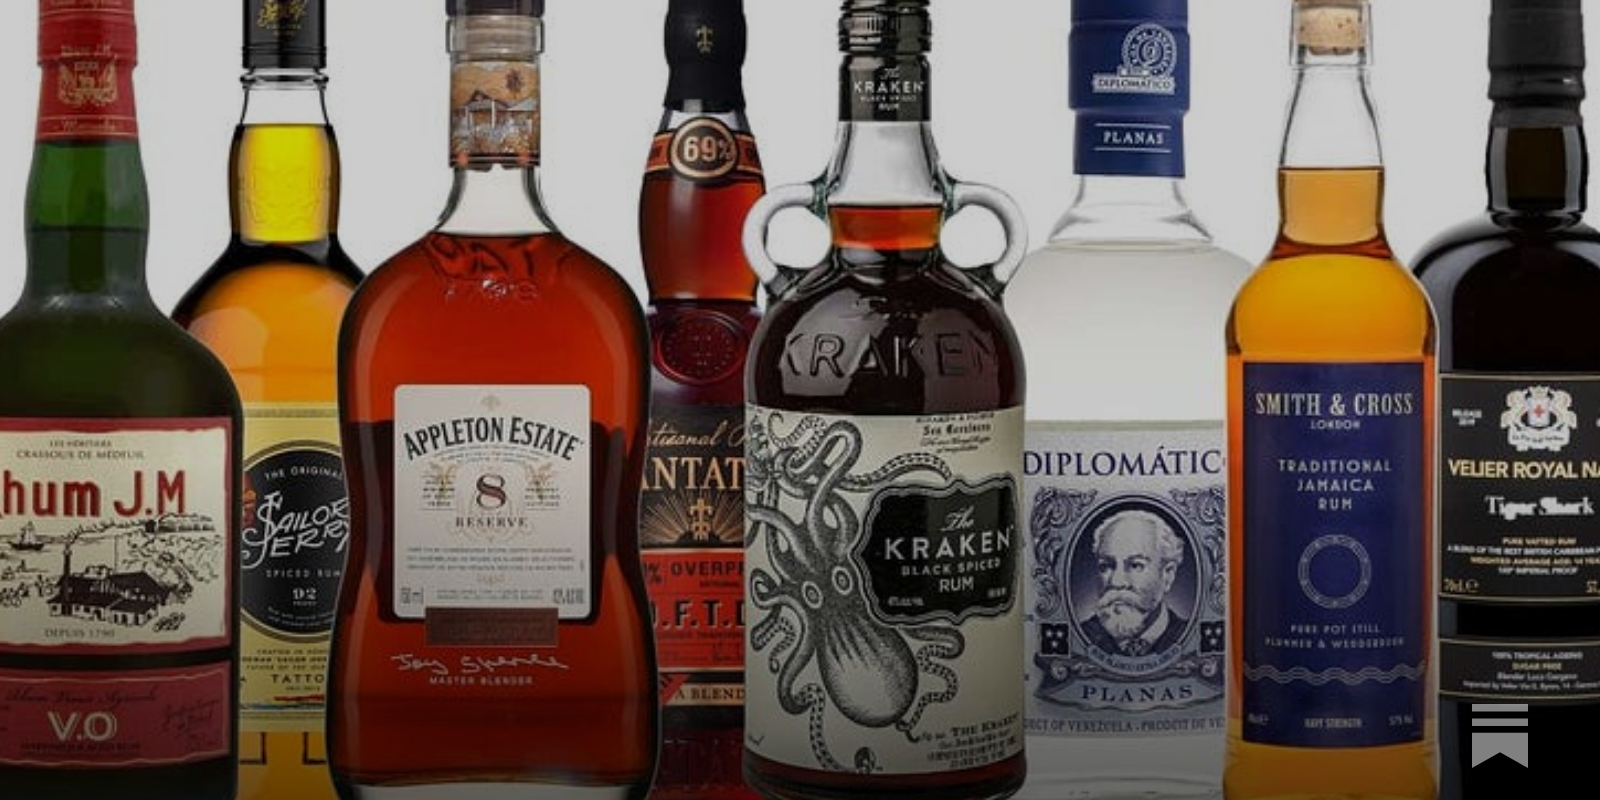 Rum Brand Reference - Who Makes and Owns the Brands